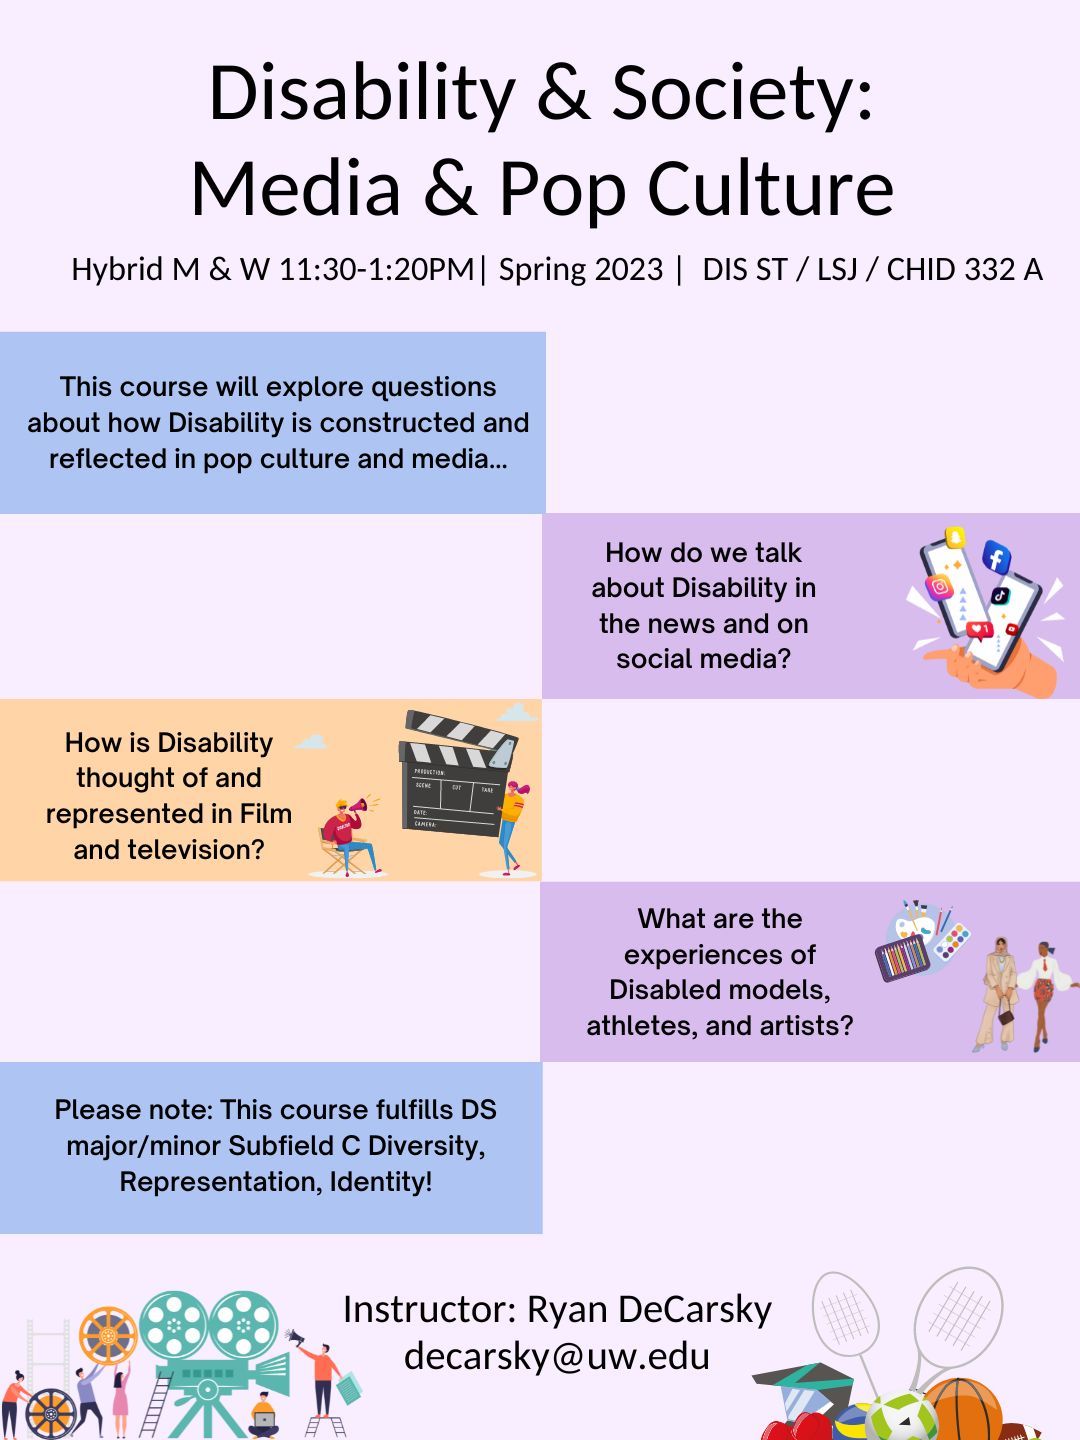 Flyer for course. Title in large letters says “Disability and Society: Pup culture and Media. Hybrid M and W 11:30-1:20PM. Course is DIST ST / CHID / LSJ 332. Flyer Background is light pink with with 4 colored rectangles spread along the page. The first is blue and has text over it: This course will explore questions about how Disability is constructed and reflected in pop culture and media. The next rectangle is purple and has text: How do we talk about Disability in the news and on social media. There is a graphic of a hand holding 2 phones with icons of different social media apps shown. The social media apps are snapchat, instagram, facebook, and tiktok. The next rectable is tan and has text: How is Disability thought of and represented in Film and television? Next to the text is a graphic of a film director siting in a chair directing a person holding a cue card to start filming. The next rectangle is purple and has text: What are the experiences of Disabled models, athletes, and artists? Next to the text are two graphics, one of art supplies, and the other of two feminine presenting models. The final rectanlge below is blue with text: Please note this course fullfills DS major/minor subfield C diversity, representation, identity! At the bottom of the flyer it lists the isntructor Ryan DeCarsky and his email decarsky@uw.edu. At bottom left corner of flyer is a graphic showing people on a movie set and at the bottom right corner of the flyer shows a graphic of various sporting equipment.